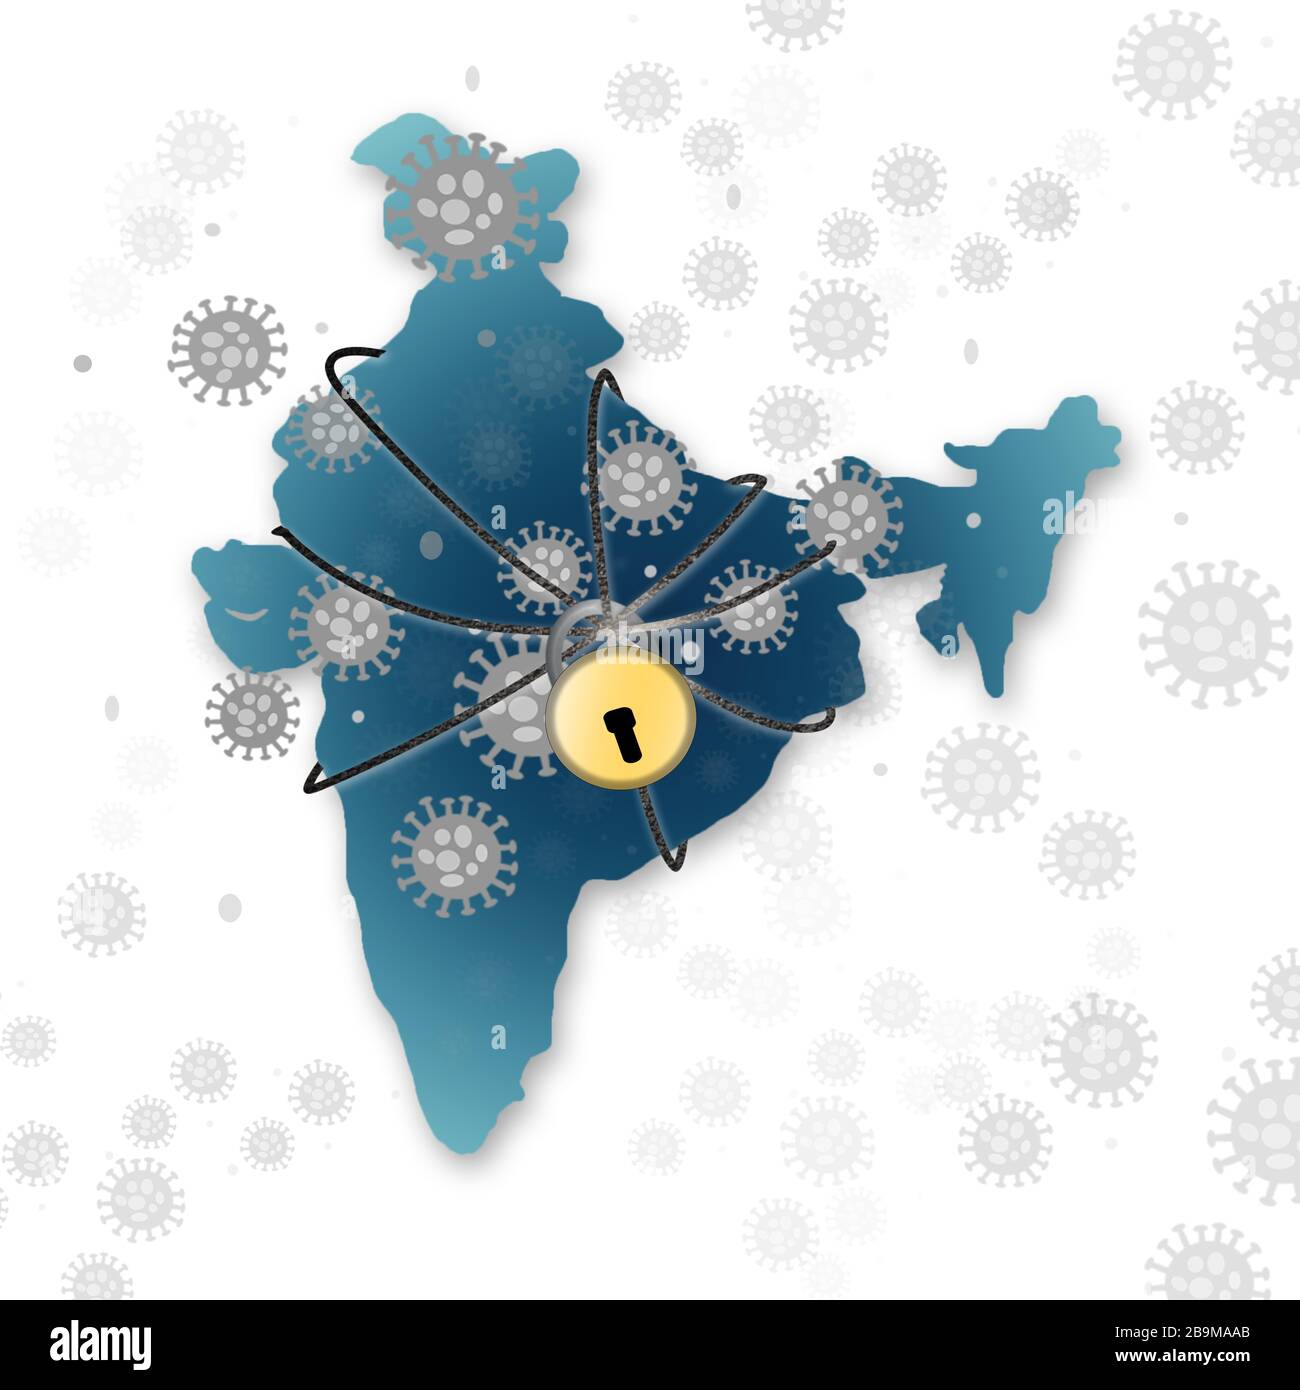 India lockdown due to Covid 19 or coronavirus outbreak shoing with virus and Indian Map as background. Stock Photo